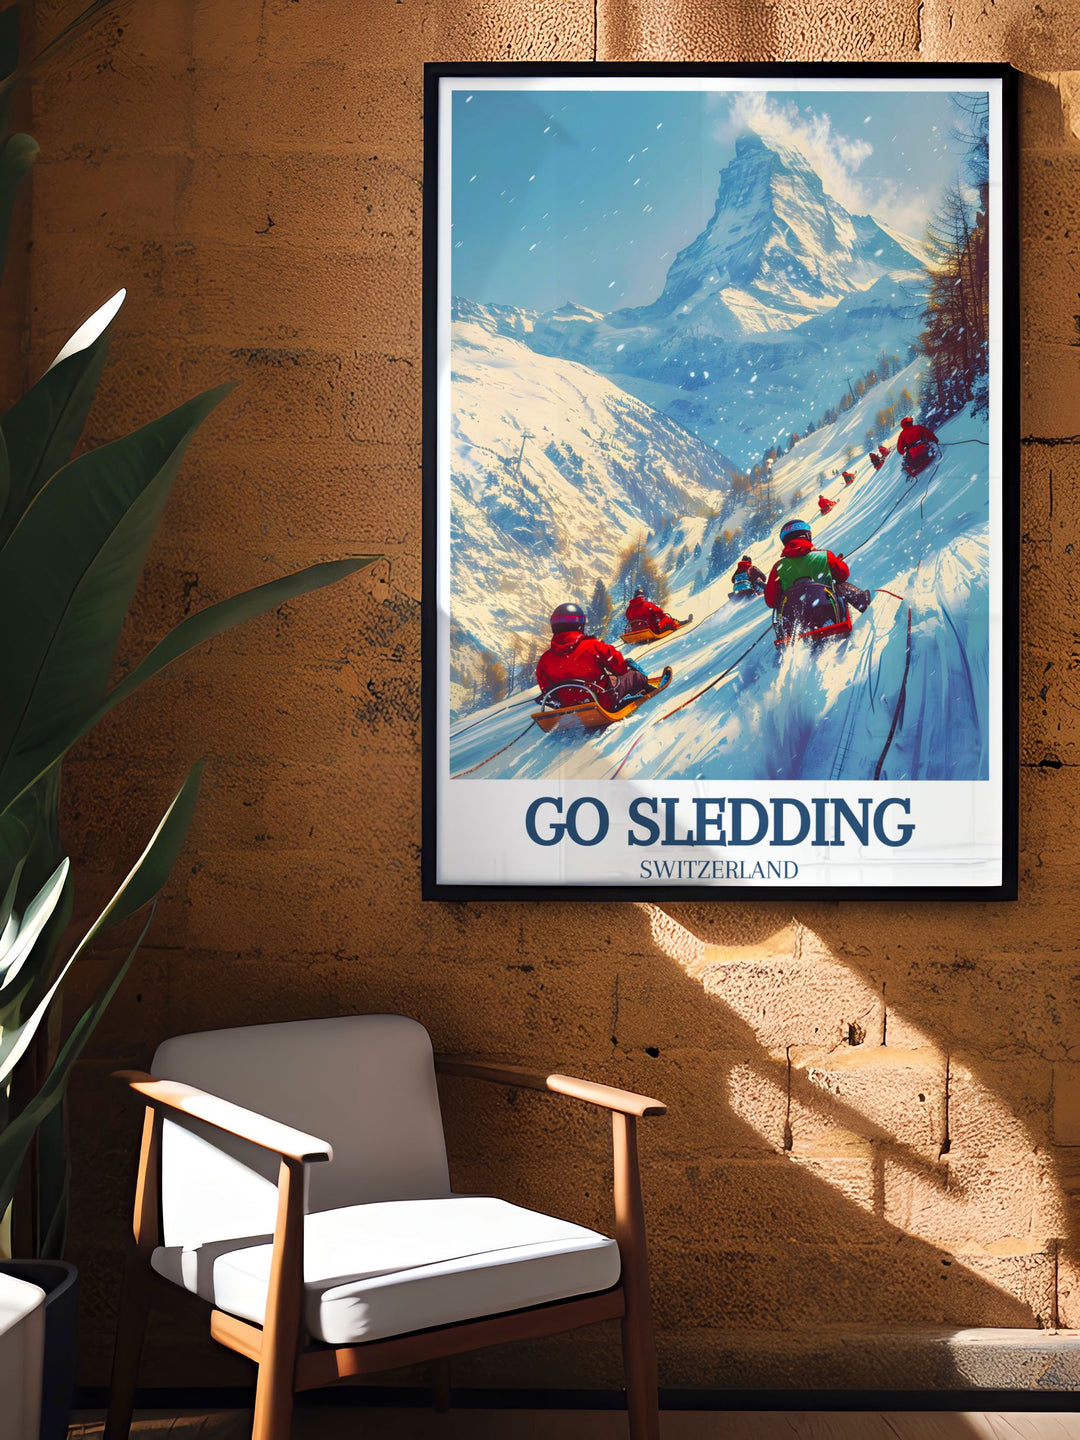 Canvas art depicting the joy of sledding in the Swiss Alps, highlighting the dynamic landscape and festive winter atmosphere of Zermatt.